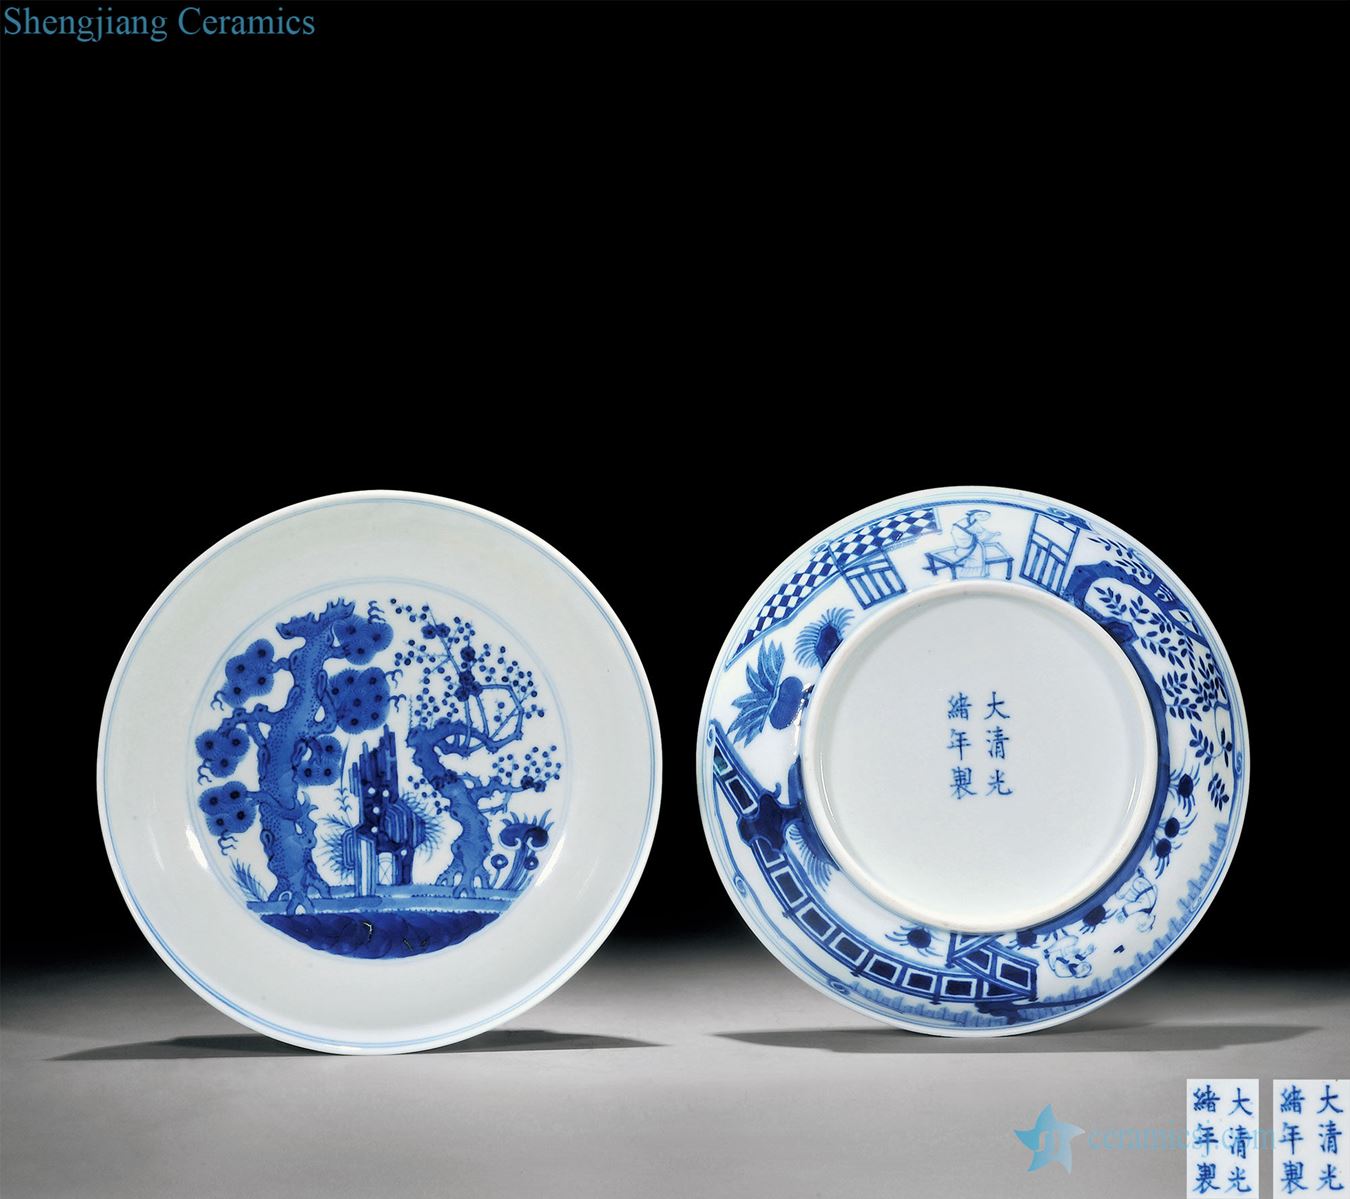 Qing guangxu Imitated yongle blue and white within, poetic figure lady baby play outside plate (a)